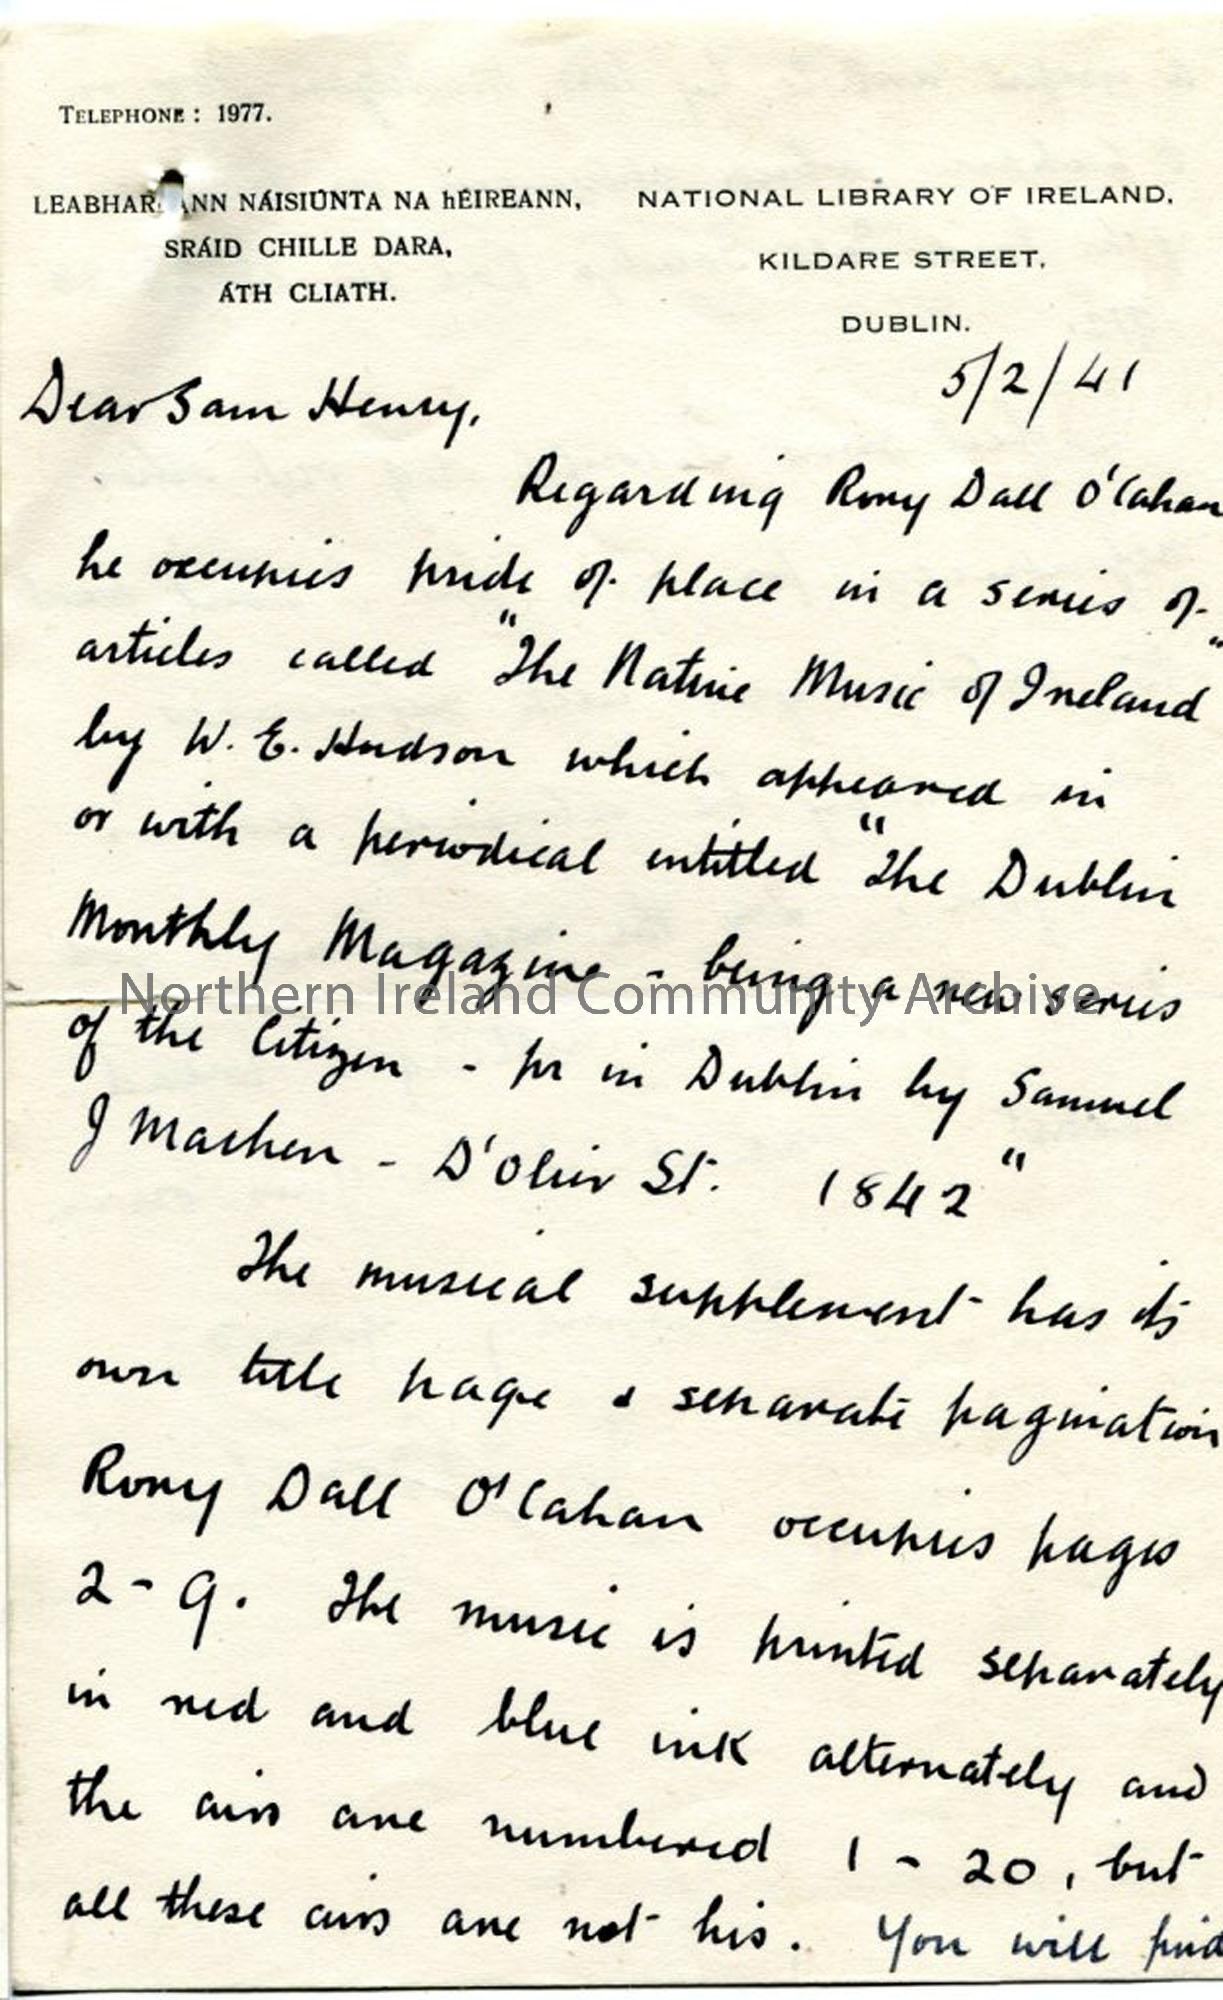 Page one: letter from JJ Bonch of National Library of Ireland, dated  5.2.1941.